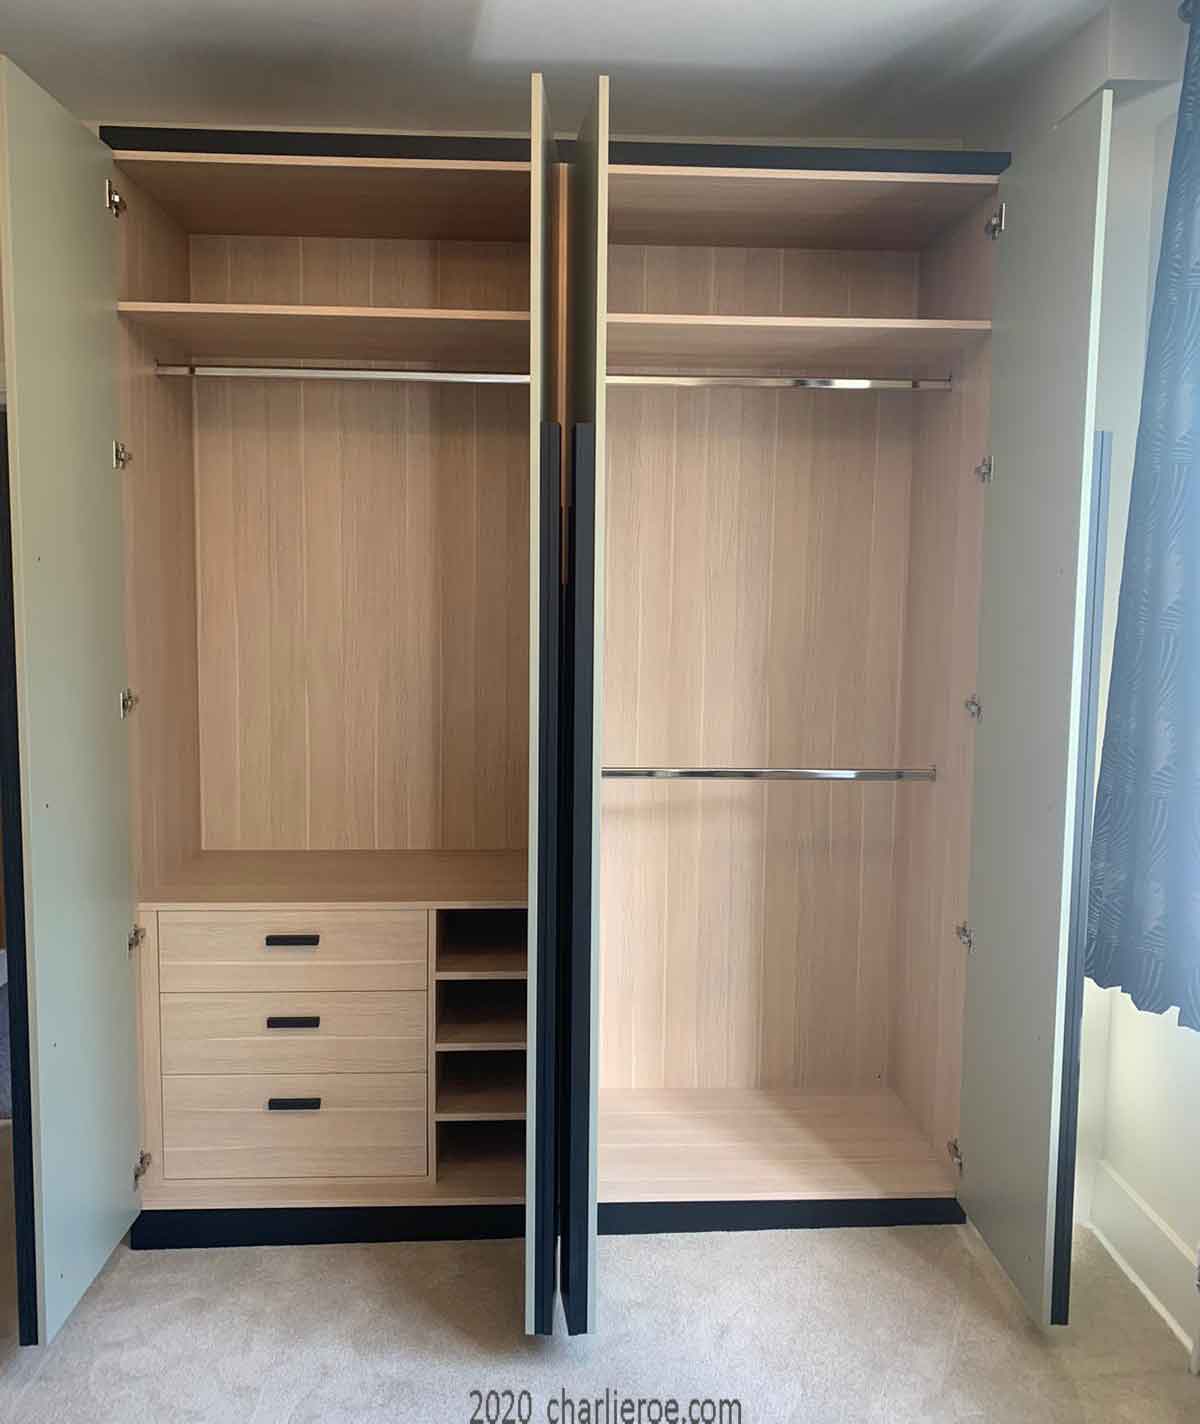 New double wardrobe with double hanging rails, shelves, chest of drawers